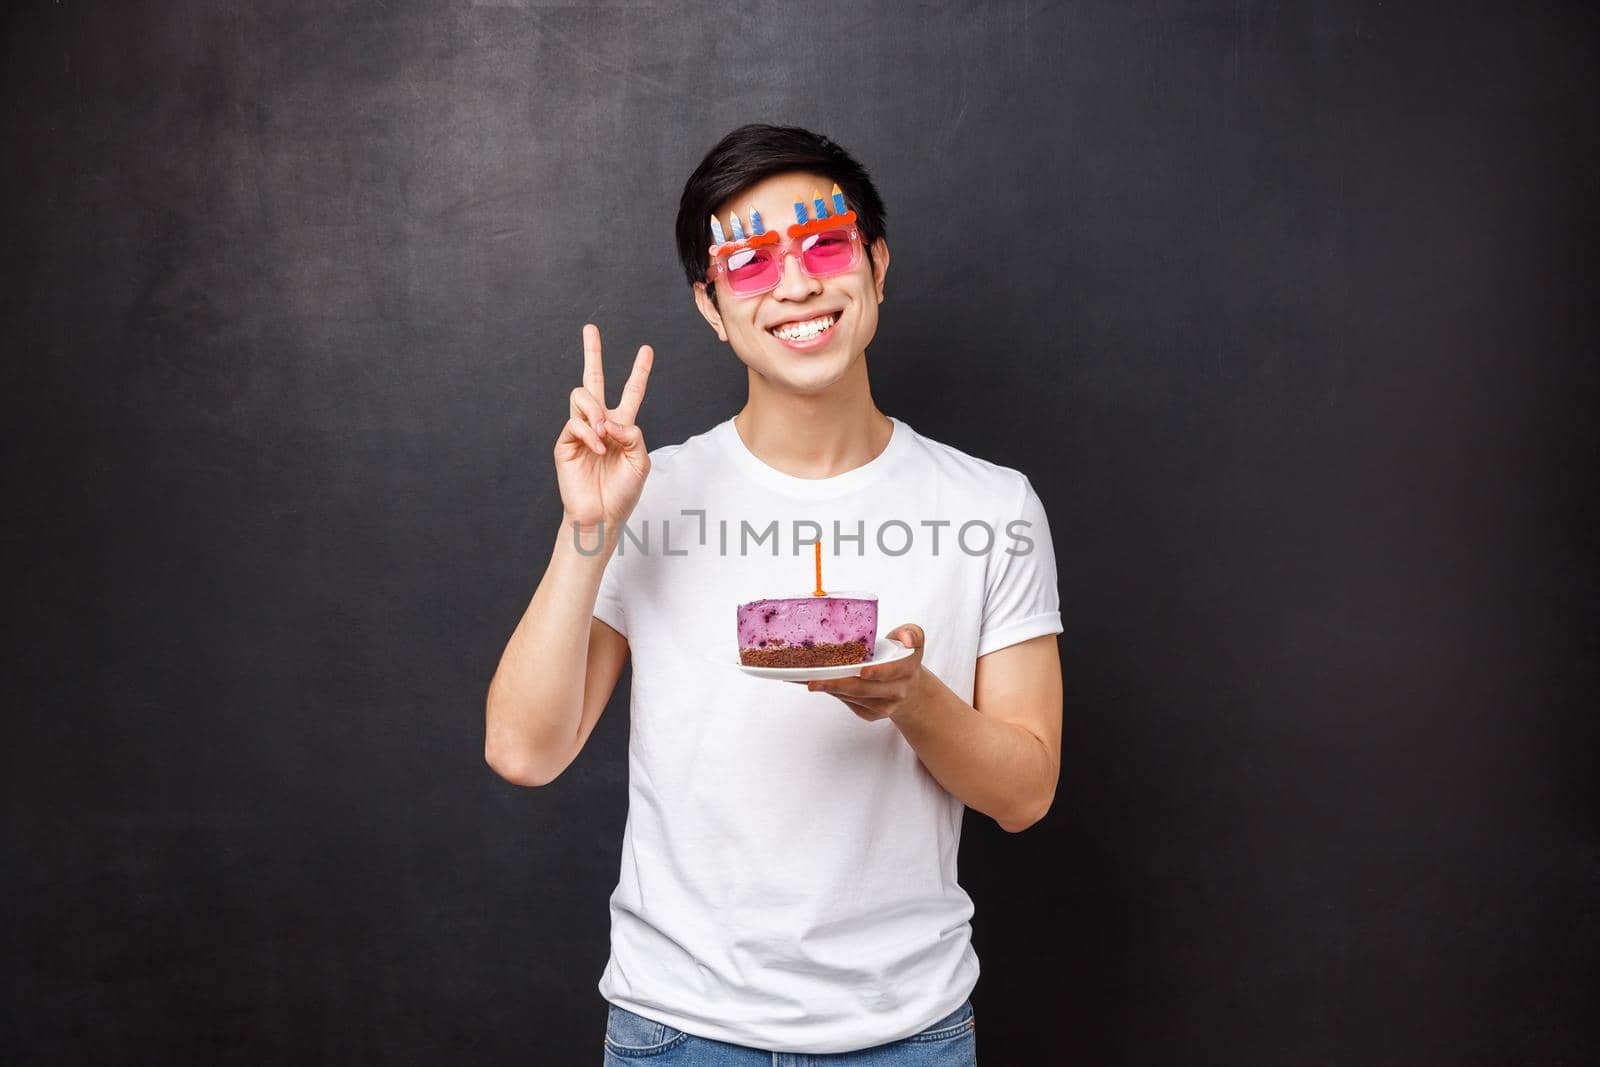 Birthday, celebration and party concept. Friendly happy man celebrating b-day holding cake on plate with lit candle, blowing it to make a wish, show peace sign, stand black background.